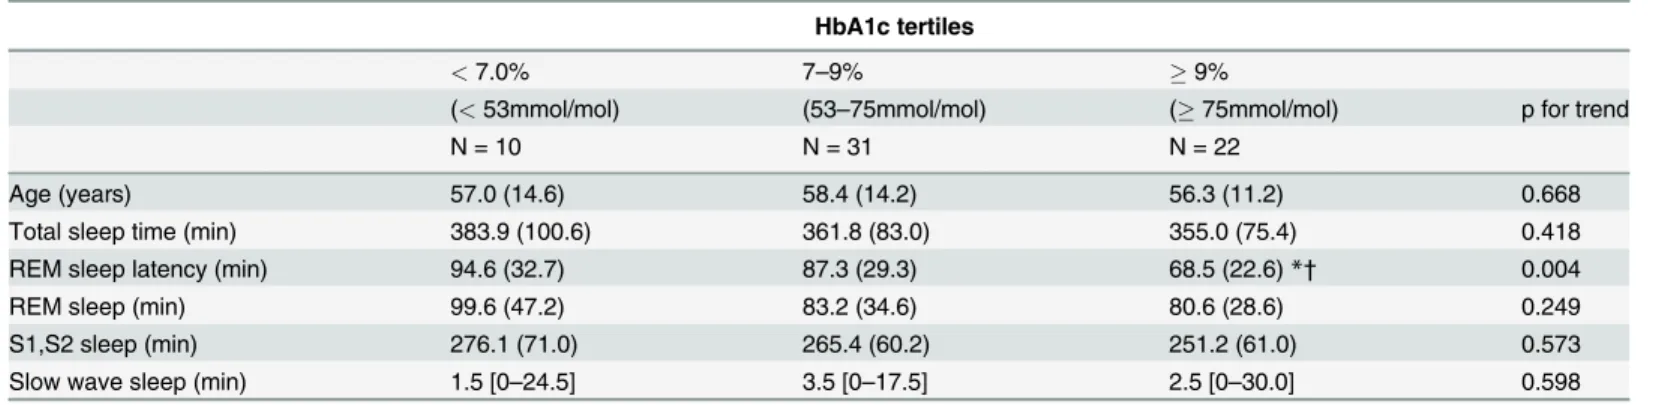 Table 3. Characteristics of sleep architecture in patients with type 2 DM categorized by HbA1c tertiles.